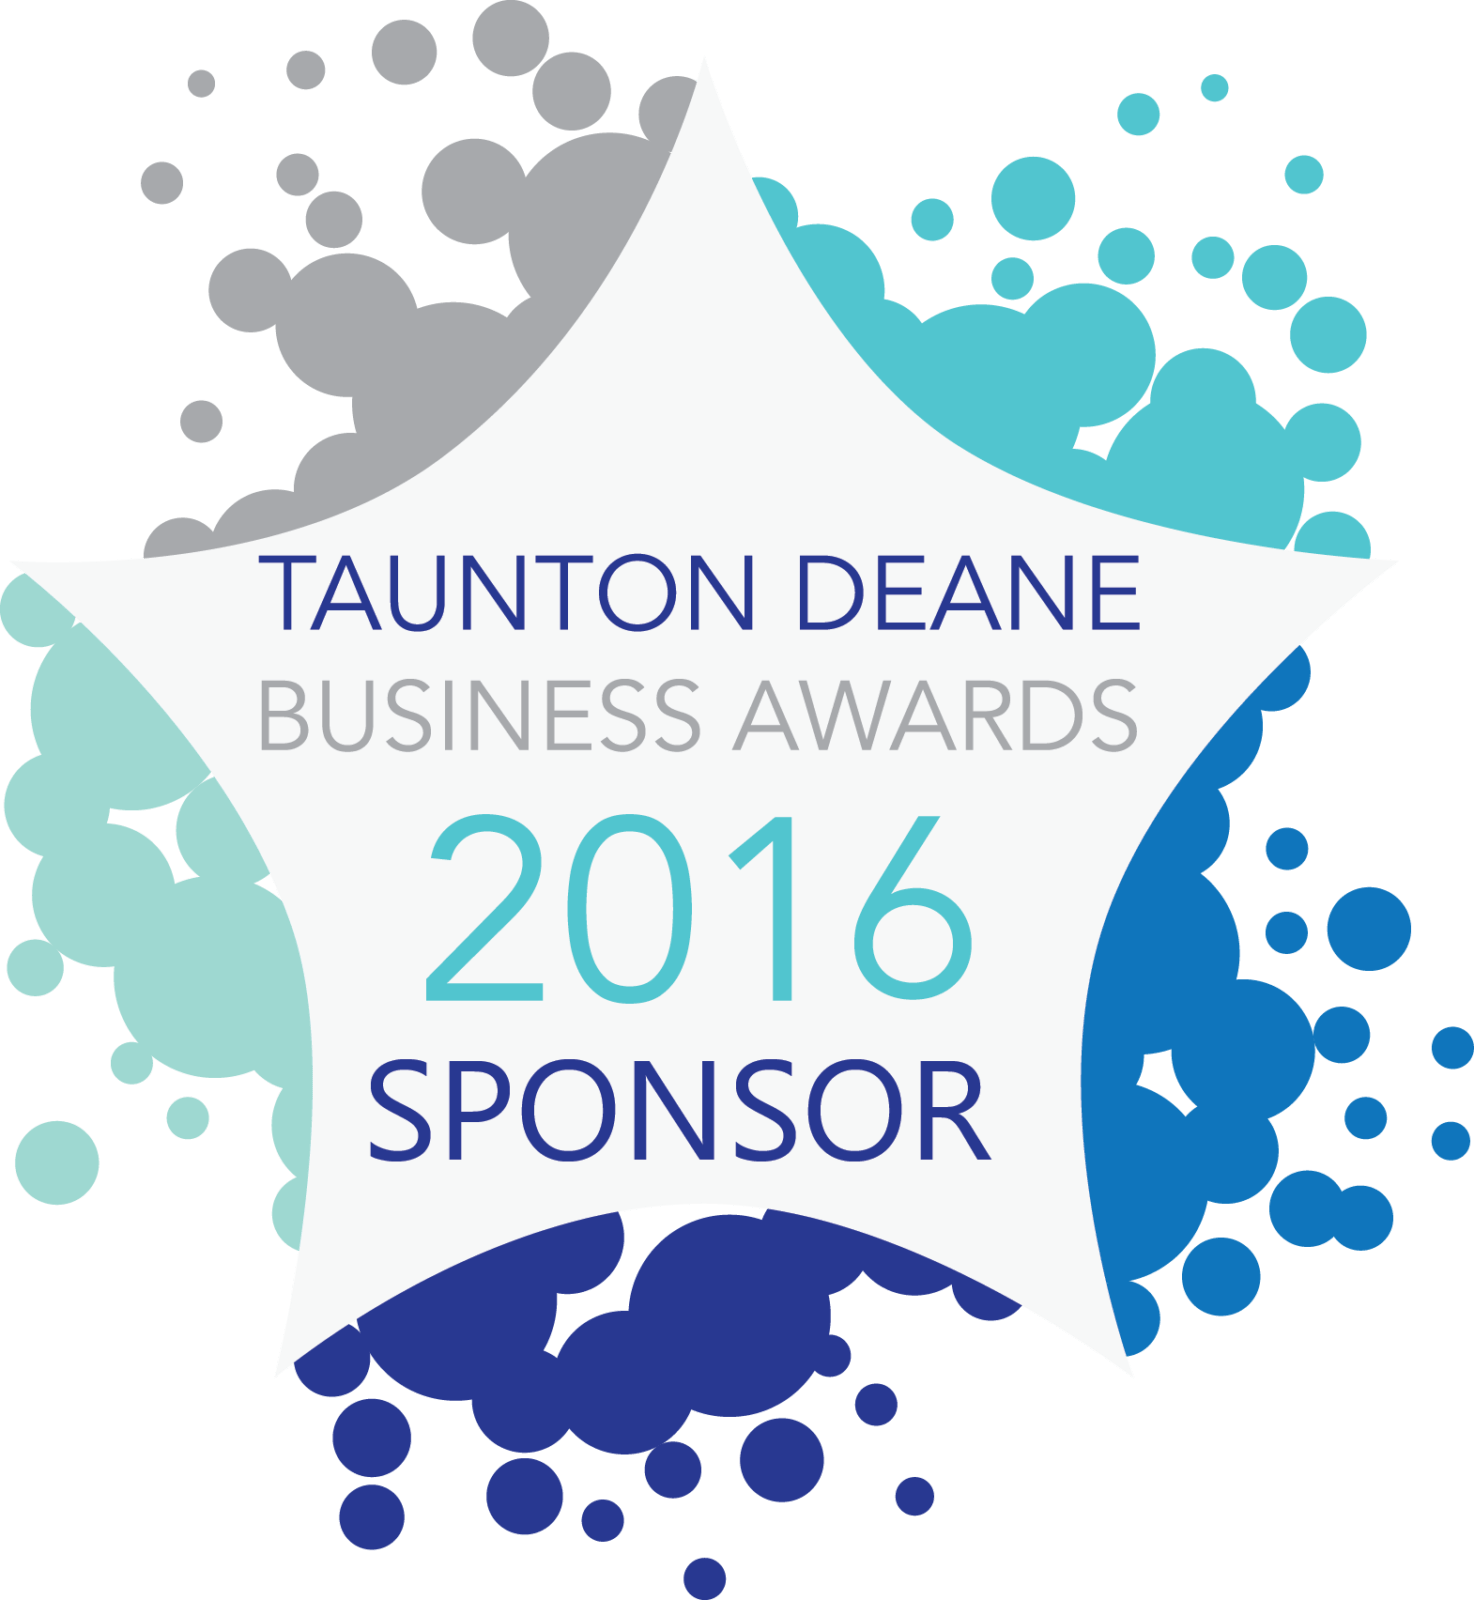 Are you entering Taunton Deane Business Awards?